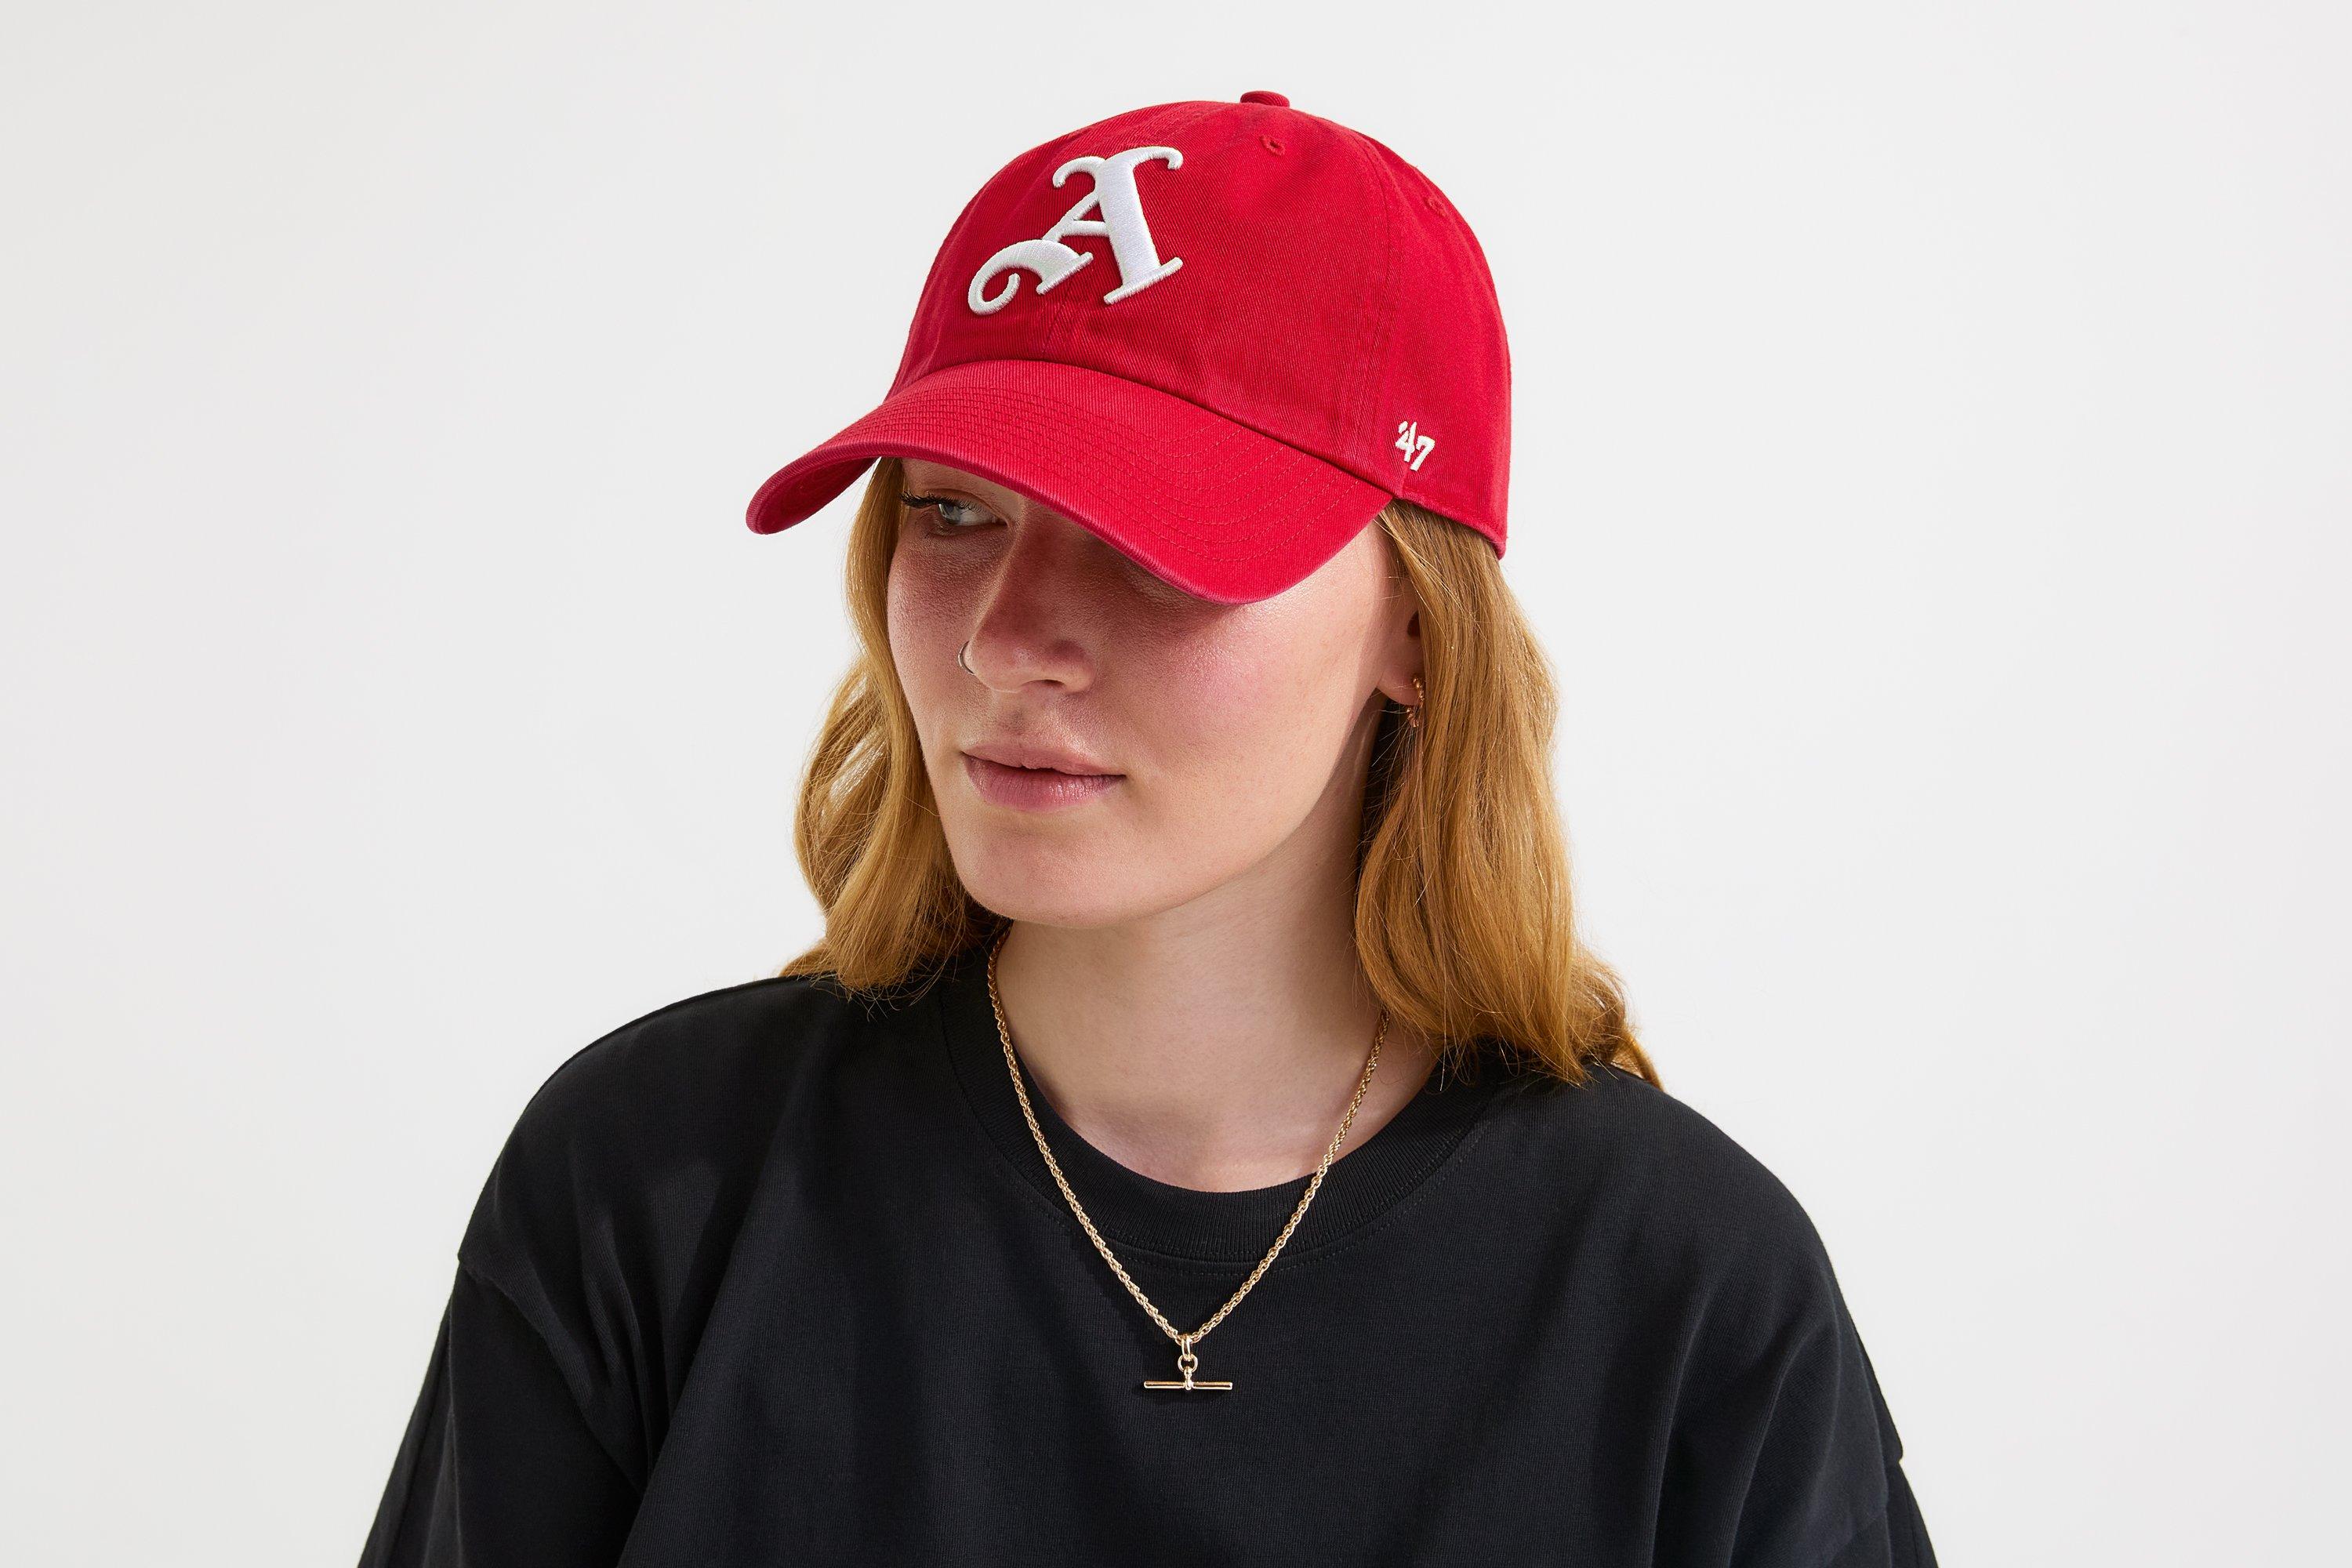 Arsenal 47 Red Gothic A Cap